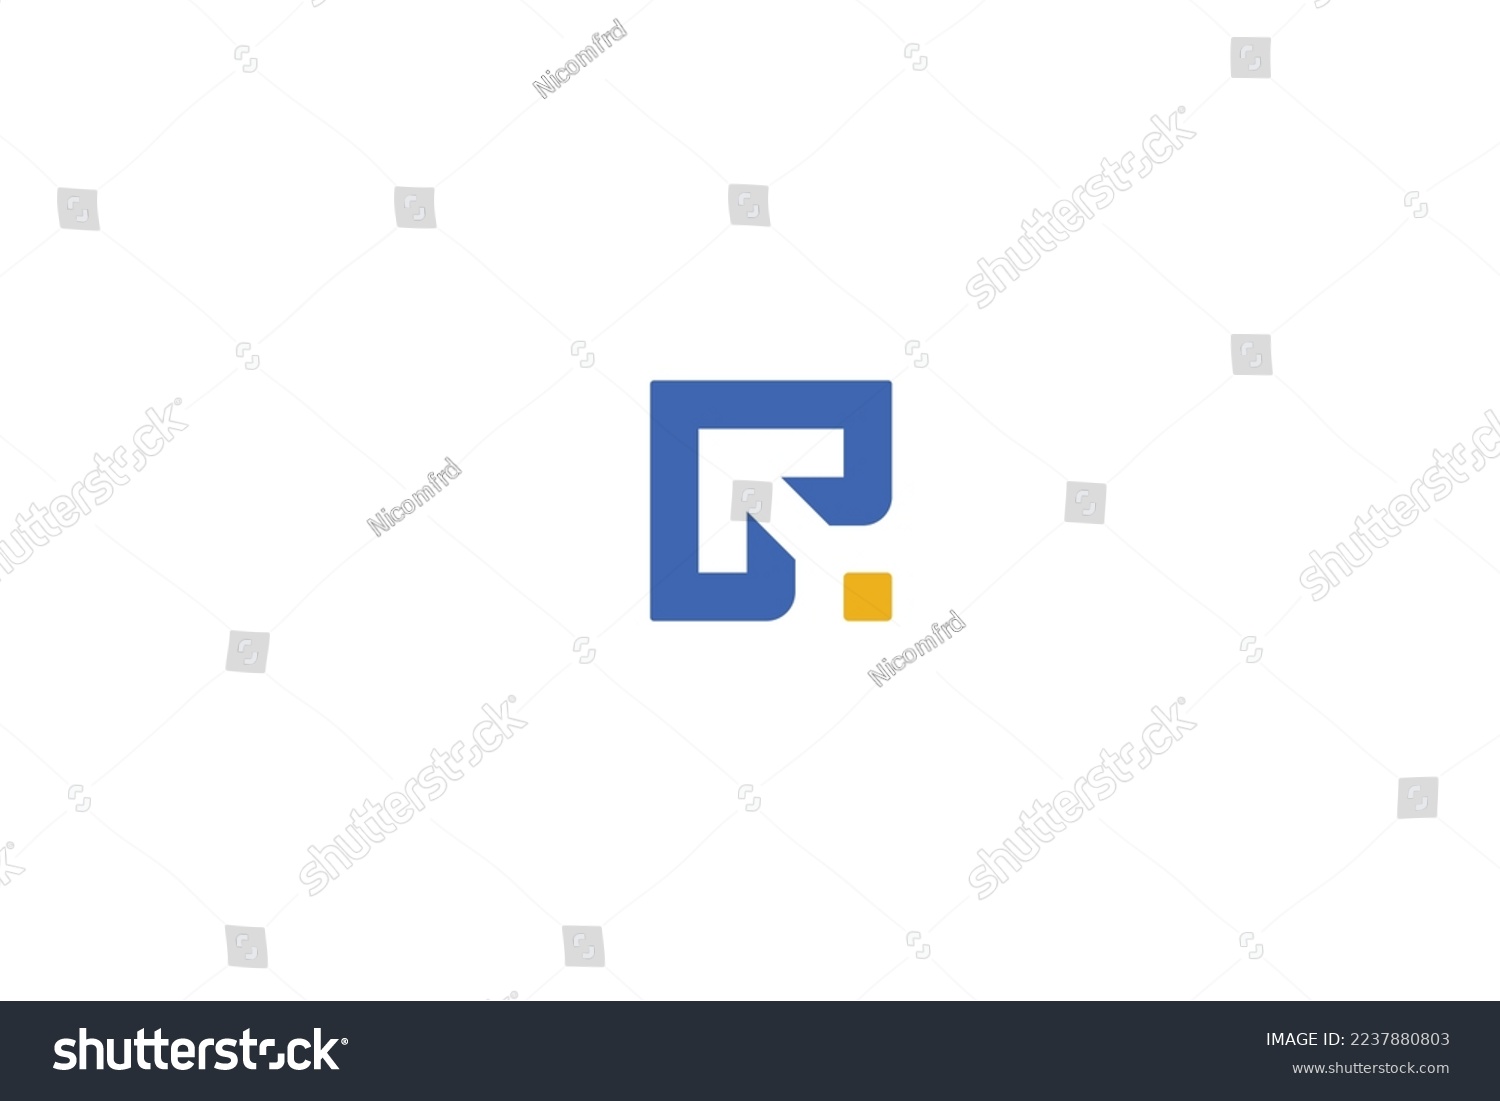 SVG of vector illustration of simple square arrow concept with L and P alphabet symbol. good for any company svg